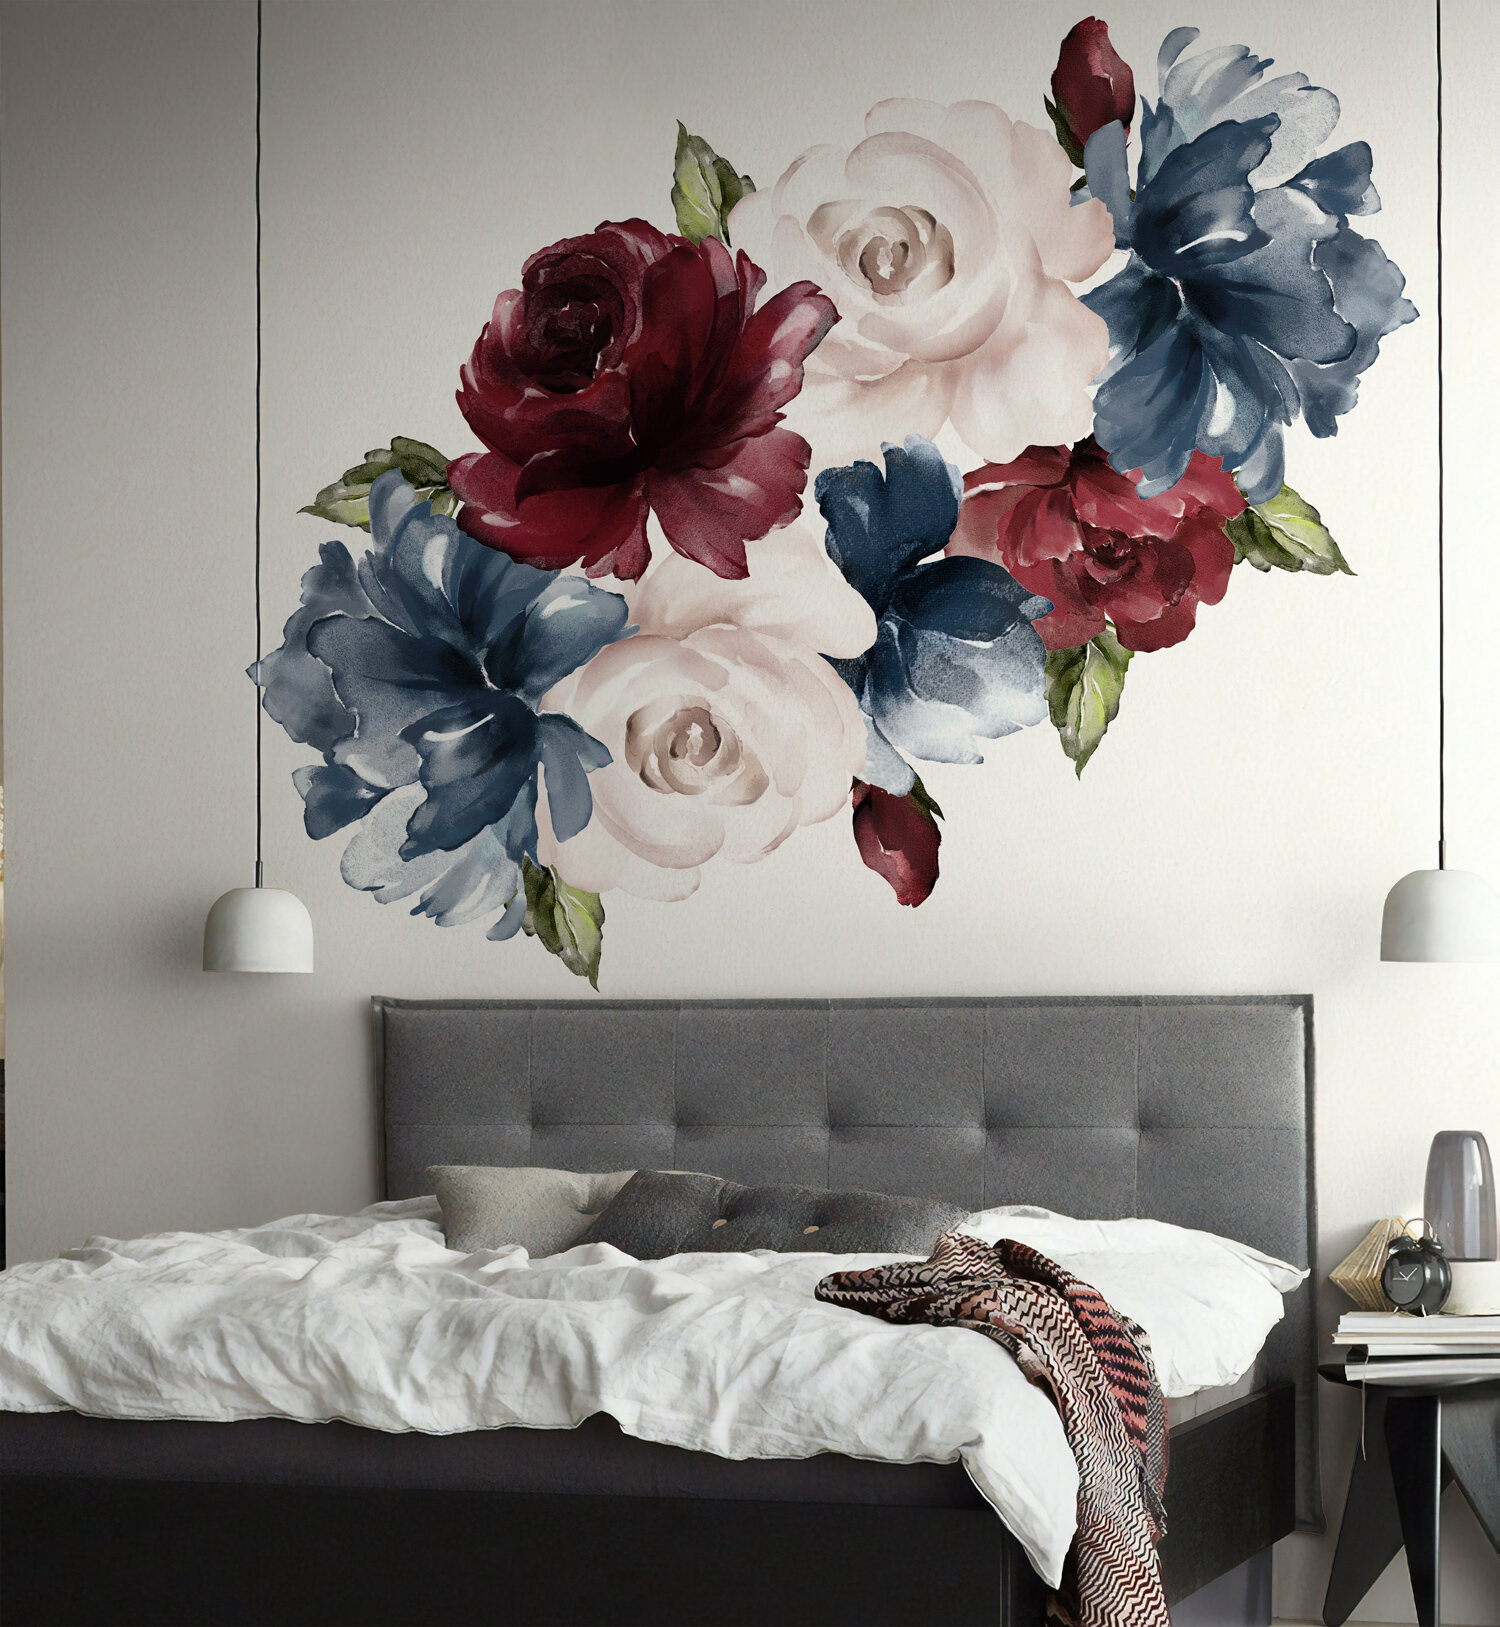 Flower Wall Stickers Peony Vinyl Wall Art Stickers Wall Decals Floral Sticker 